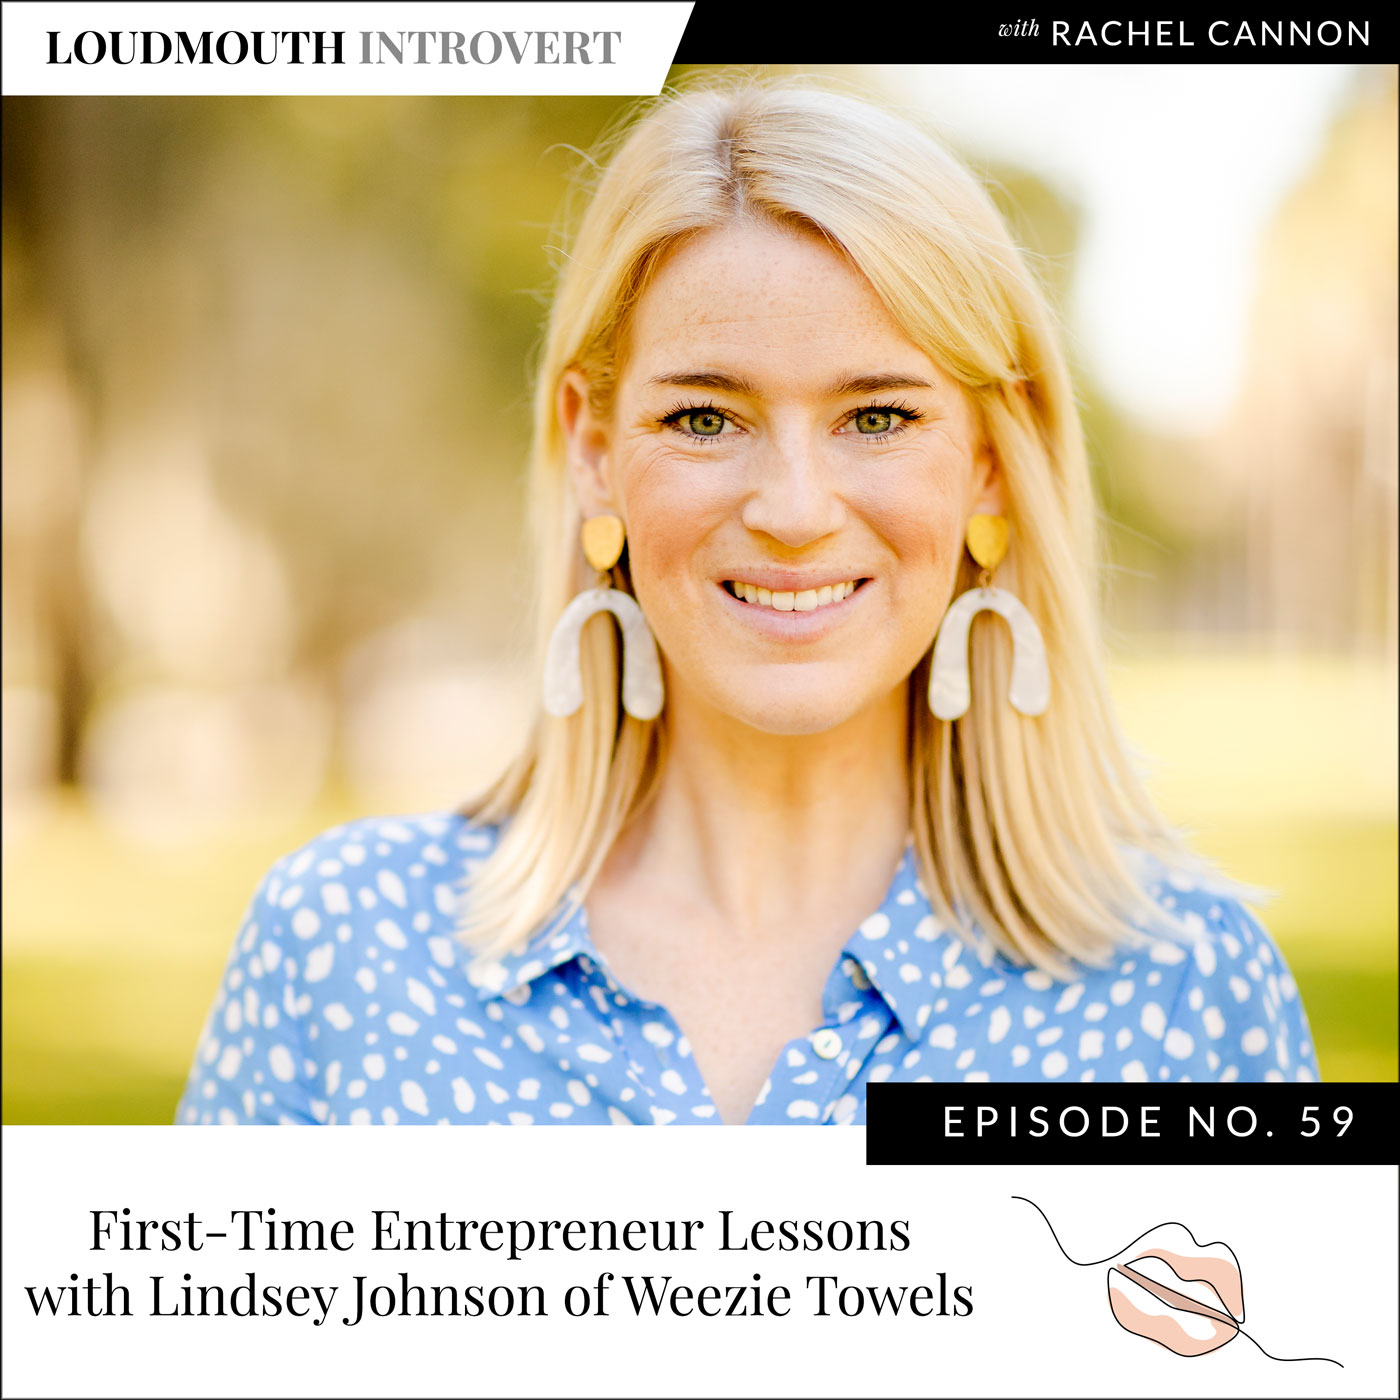 First-Time Entrepreneur Lessons with Lindsey Johnson of Weezie Towels